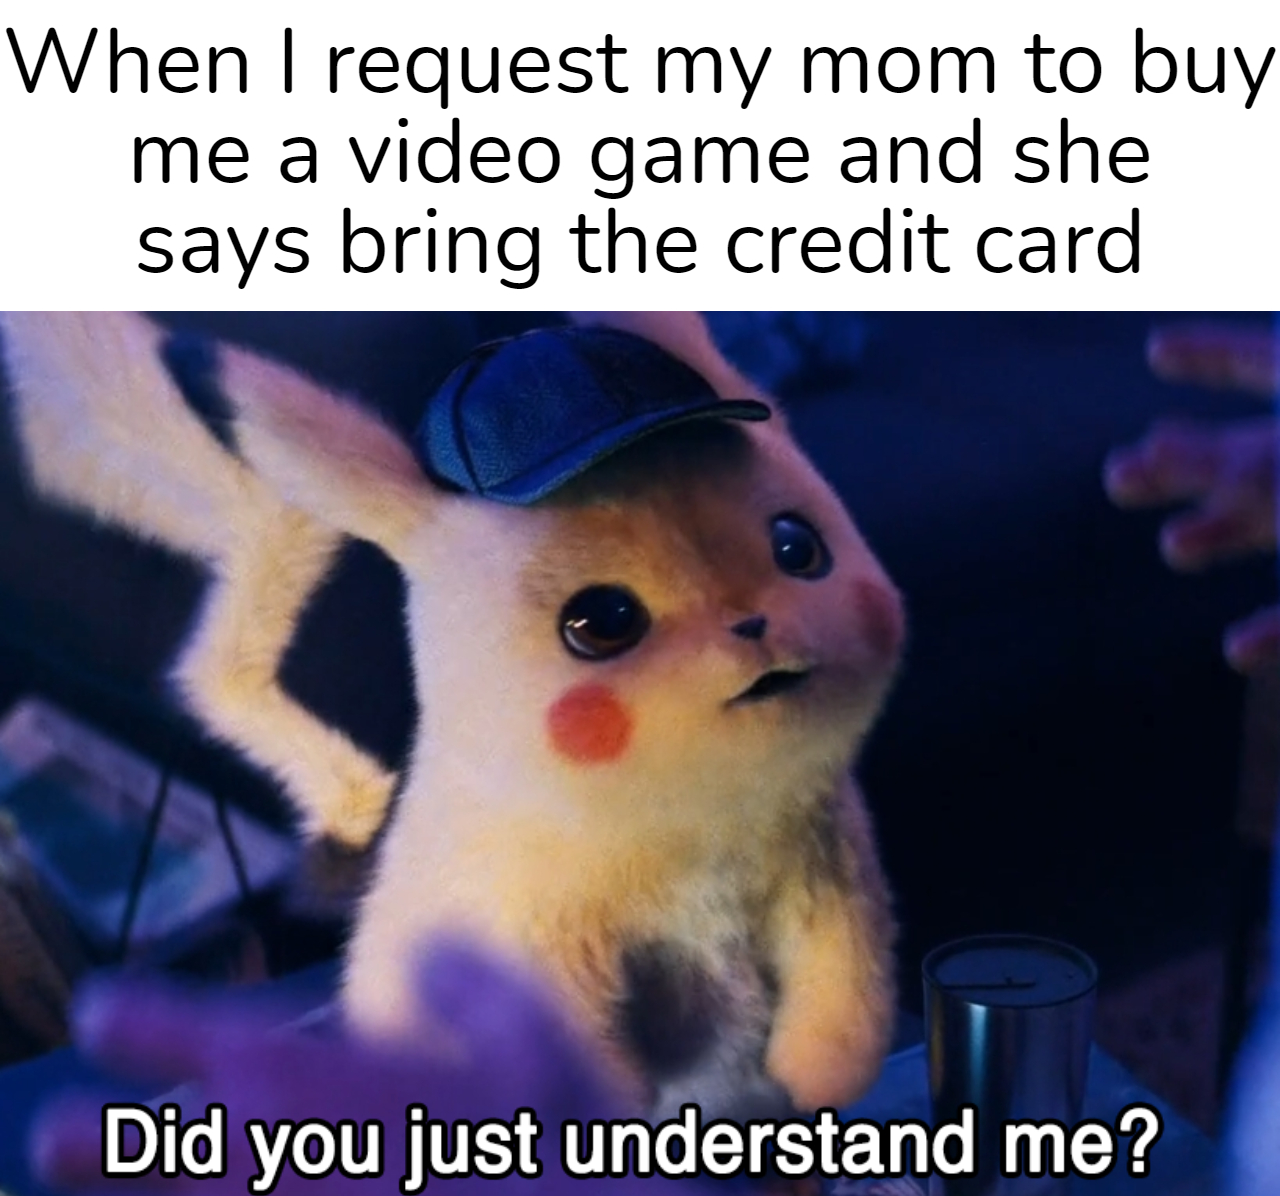 did you just understand me - When I request my mom to buy me a video game and she says bring the credit card Did you just understand me?